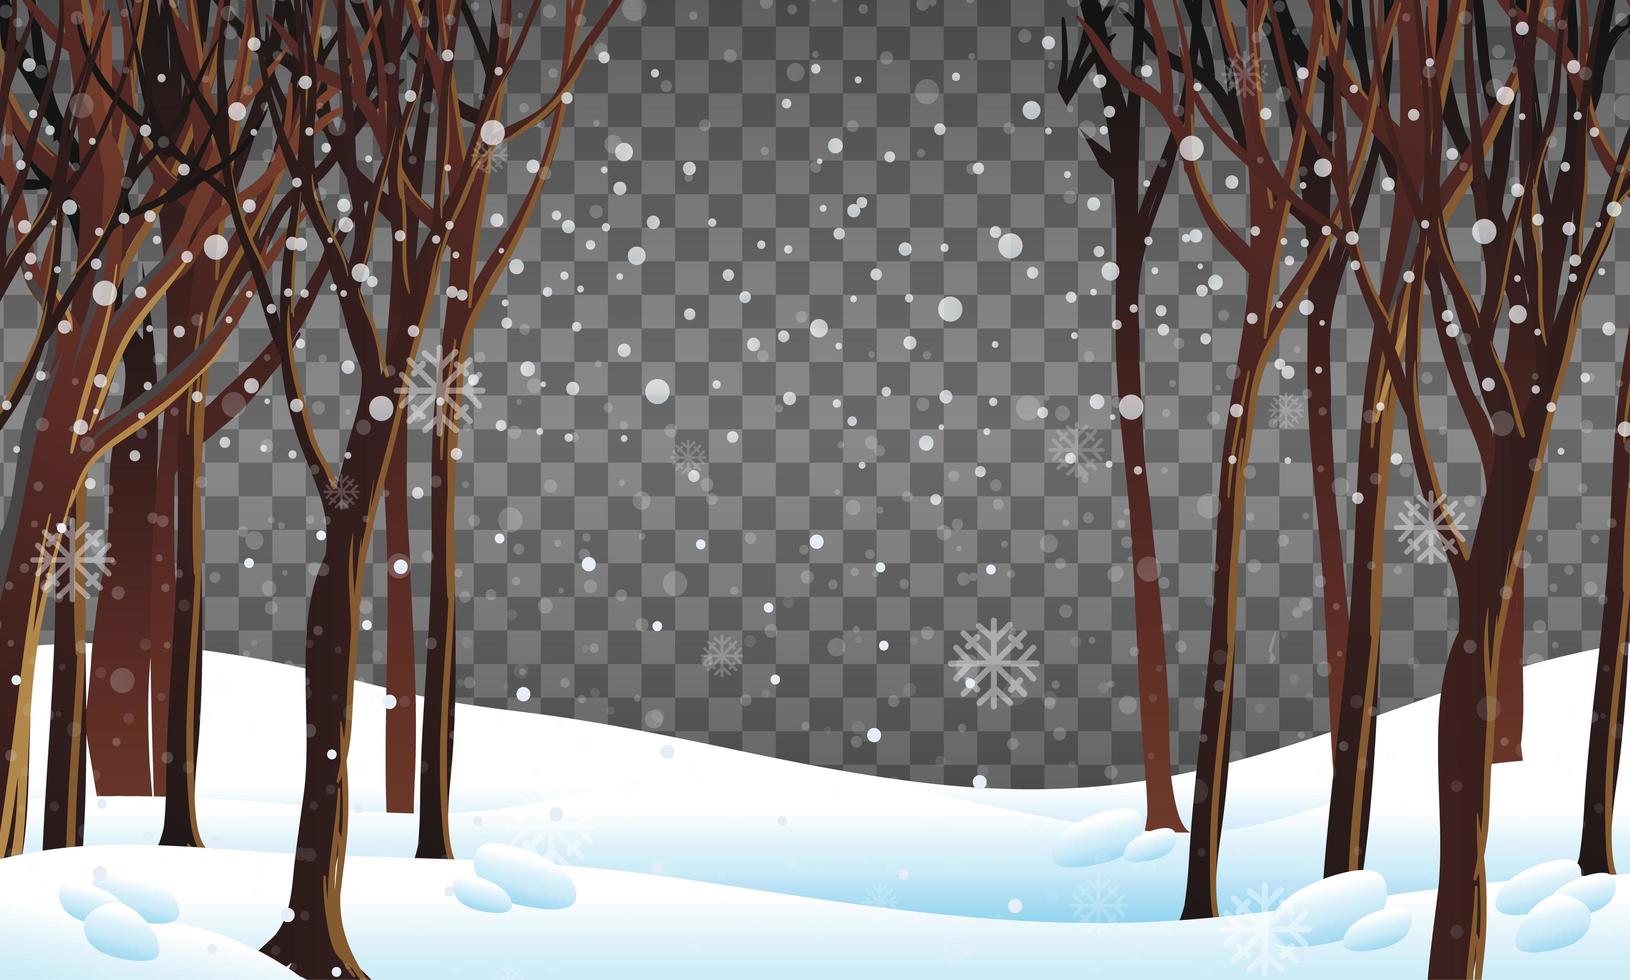 Nature scene in winter season theme with transparent background vector